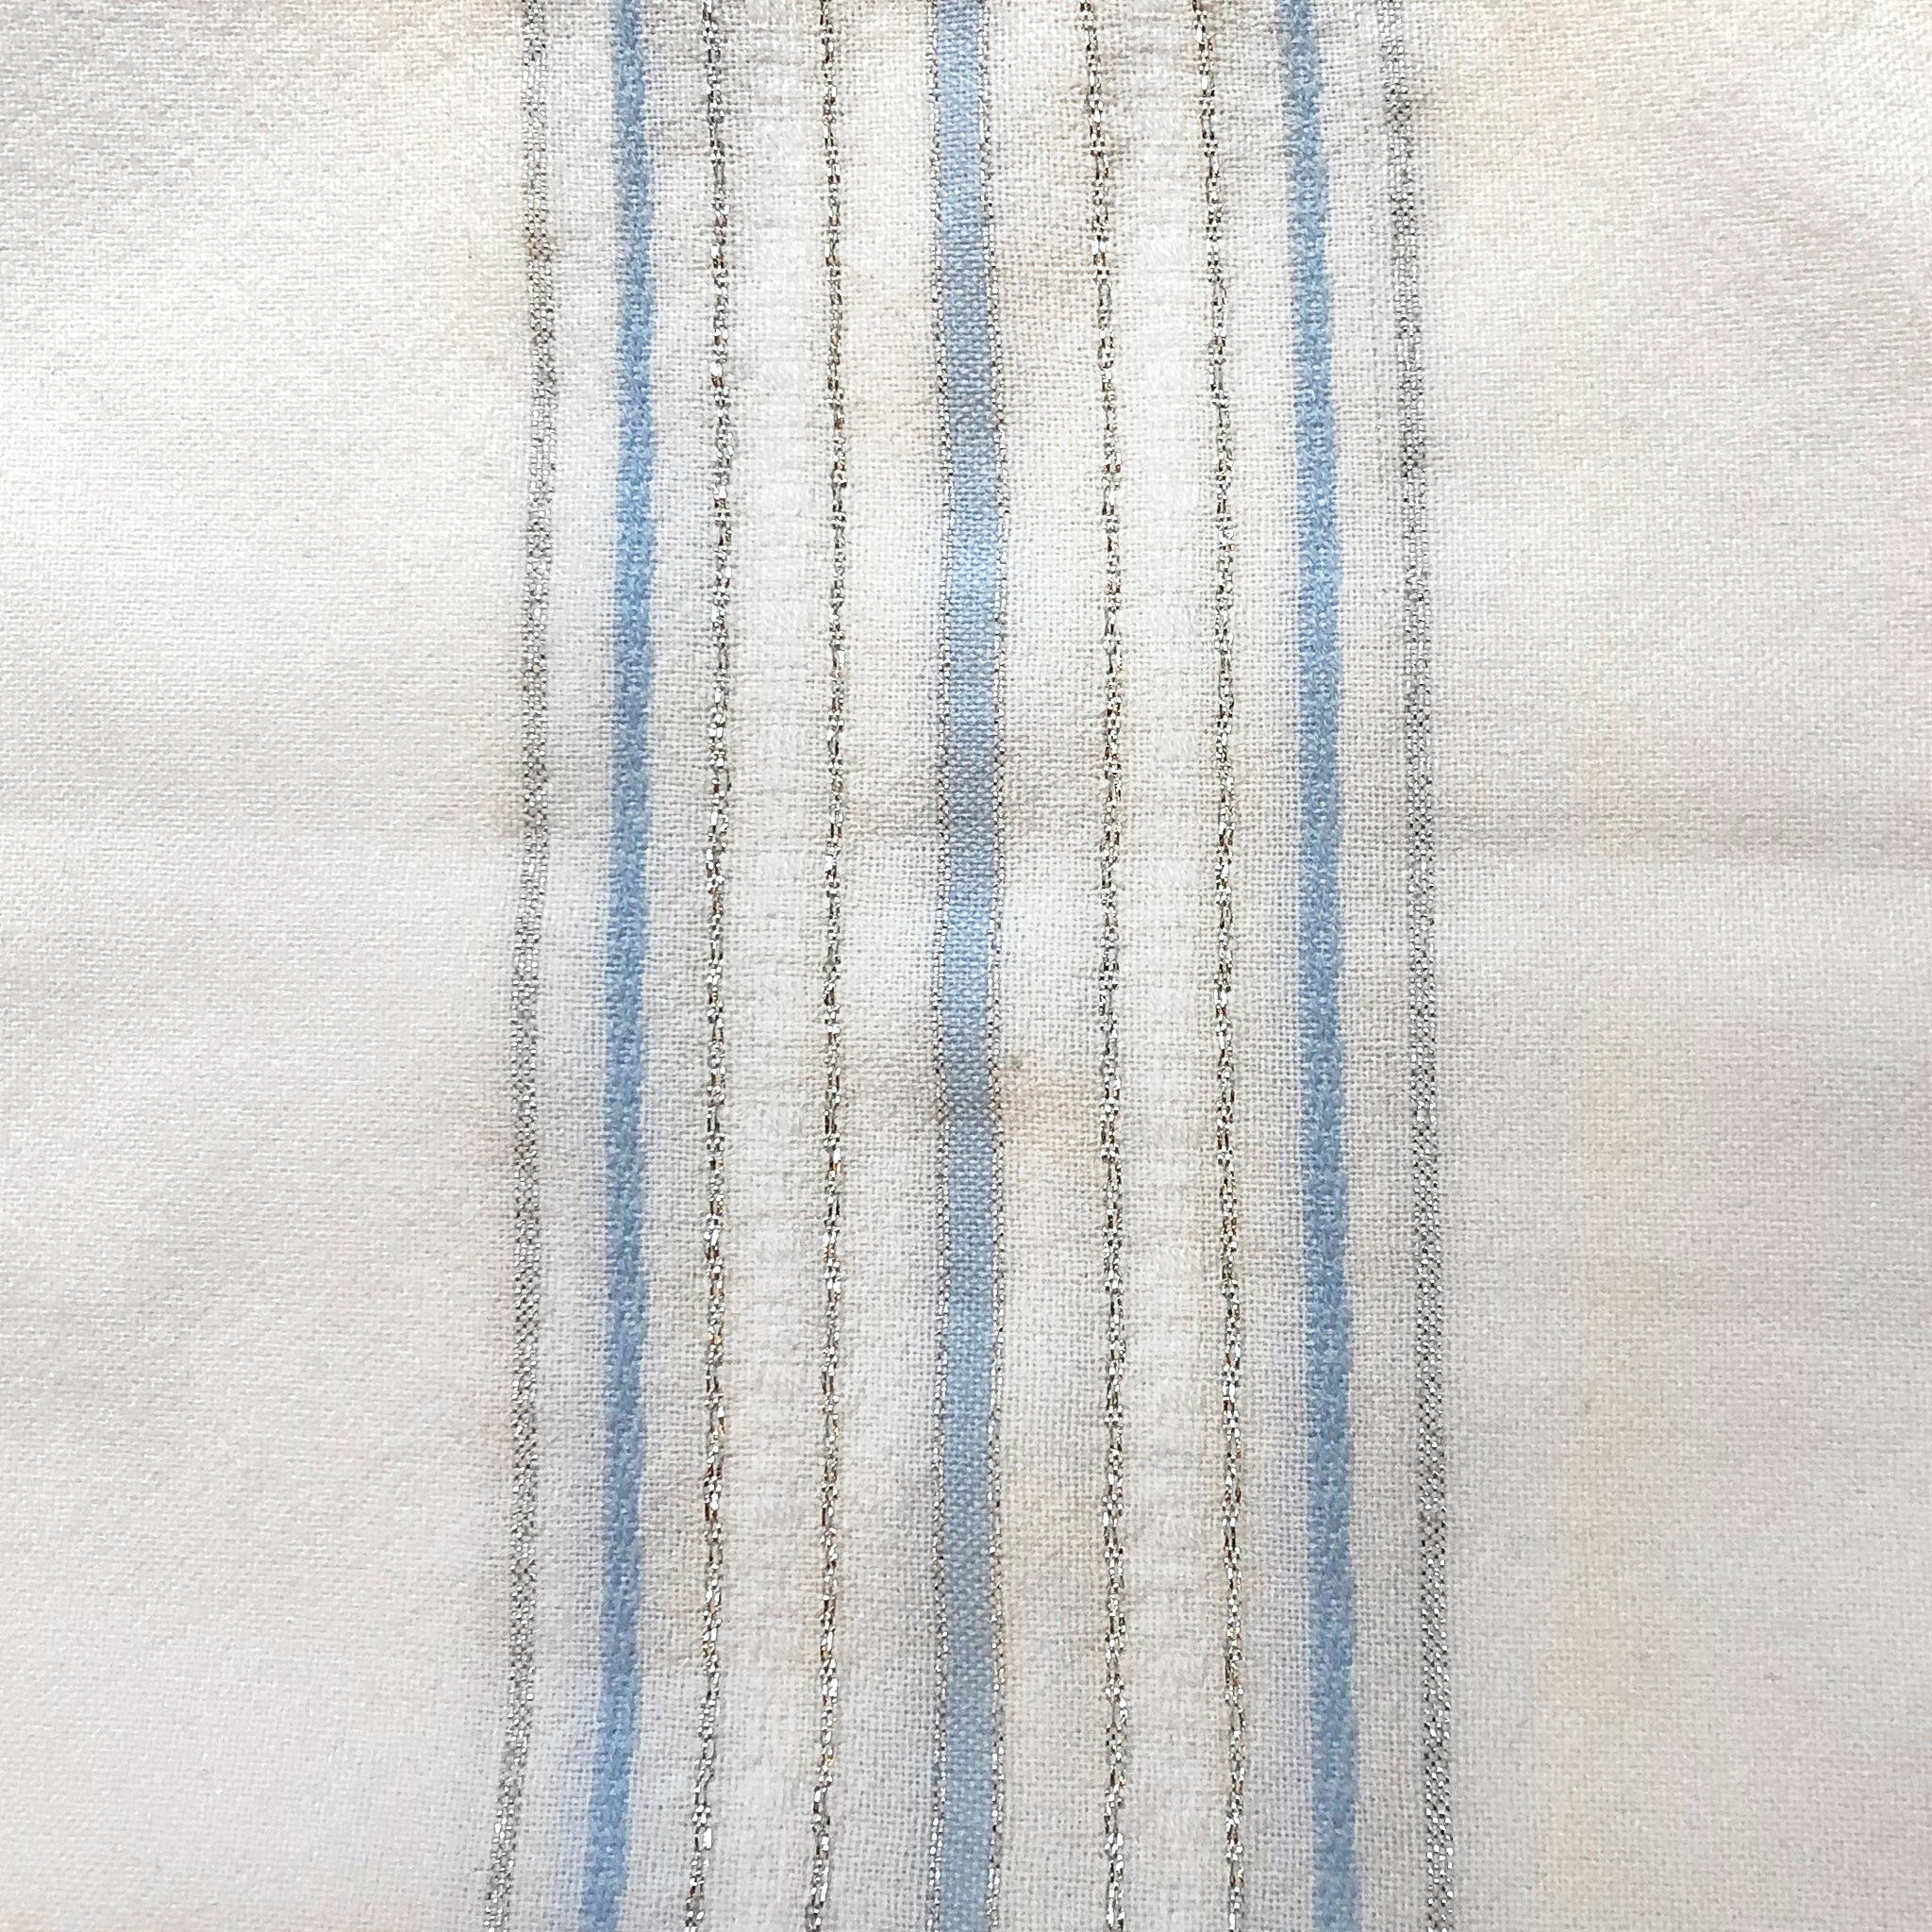 Tablecloths - Classic Design - Baby Blue and Silver on White